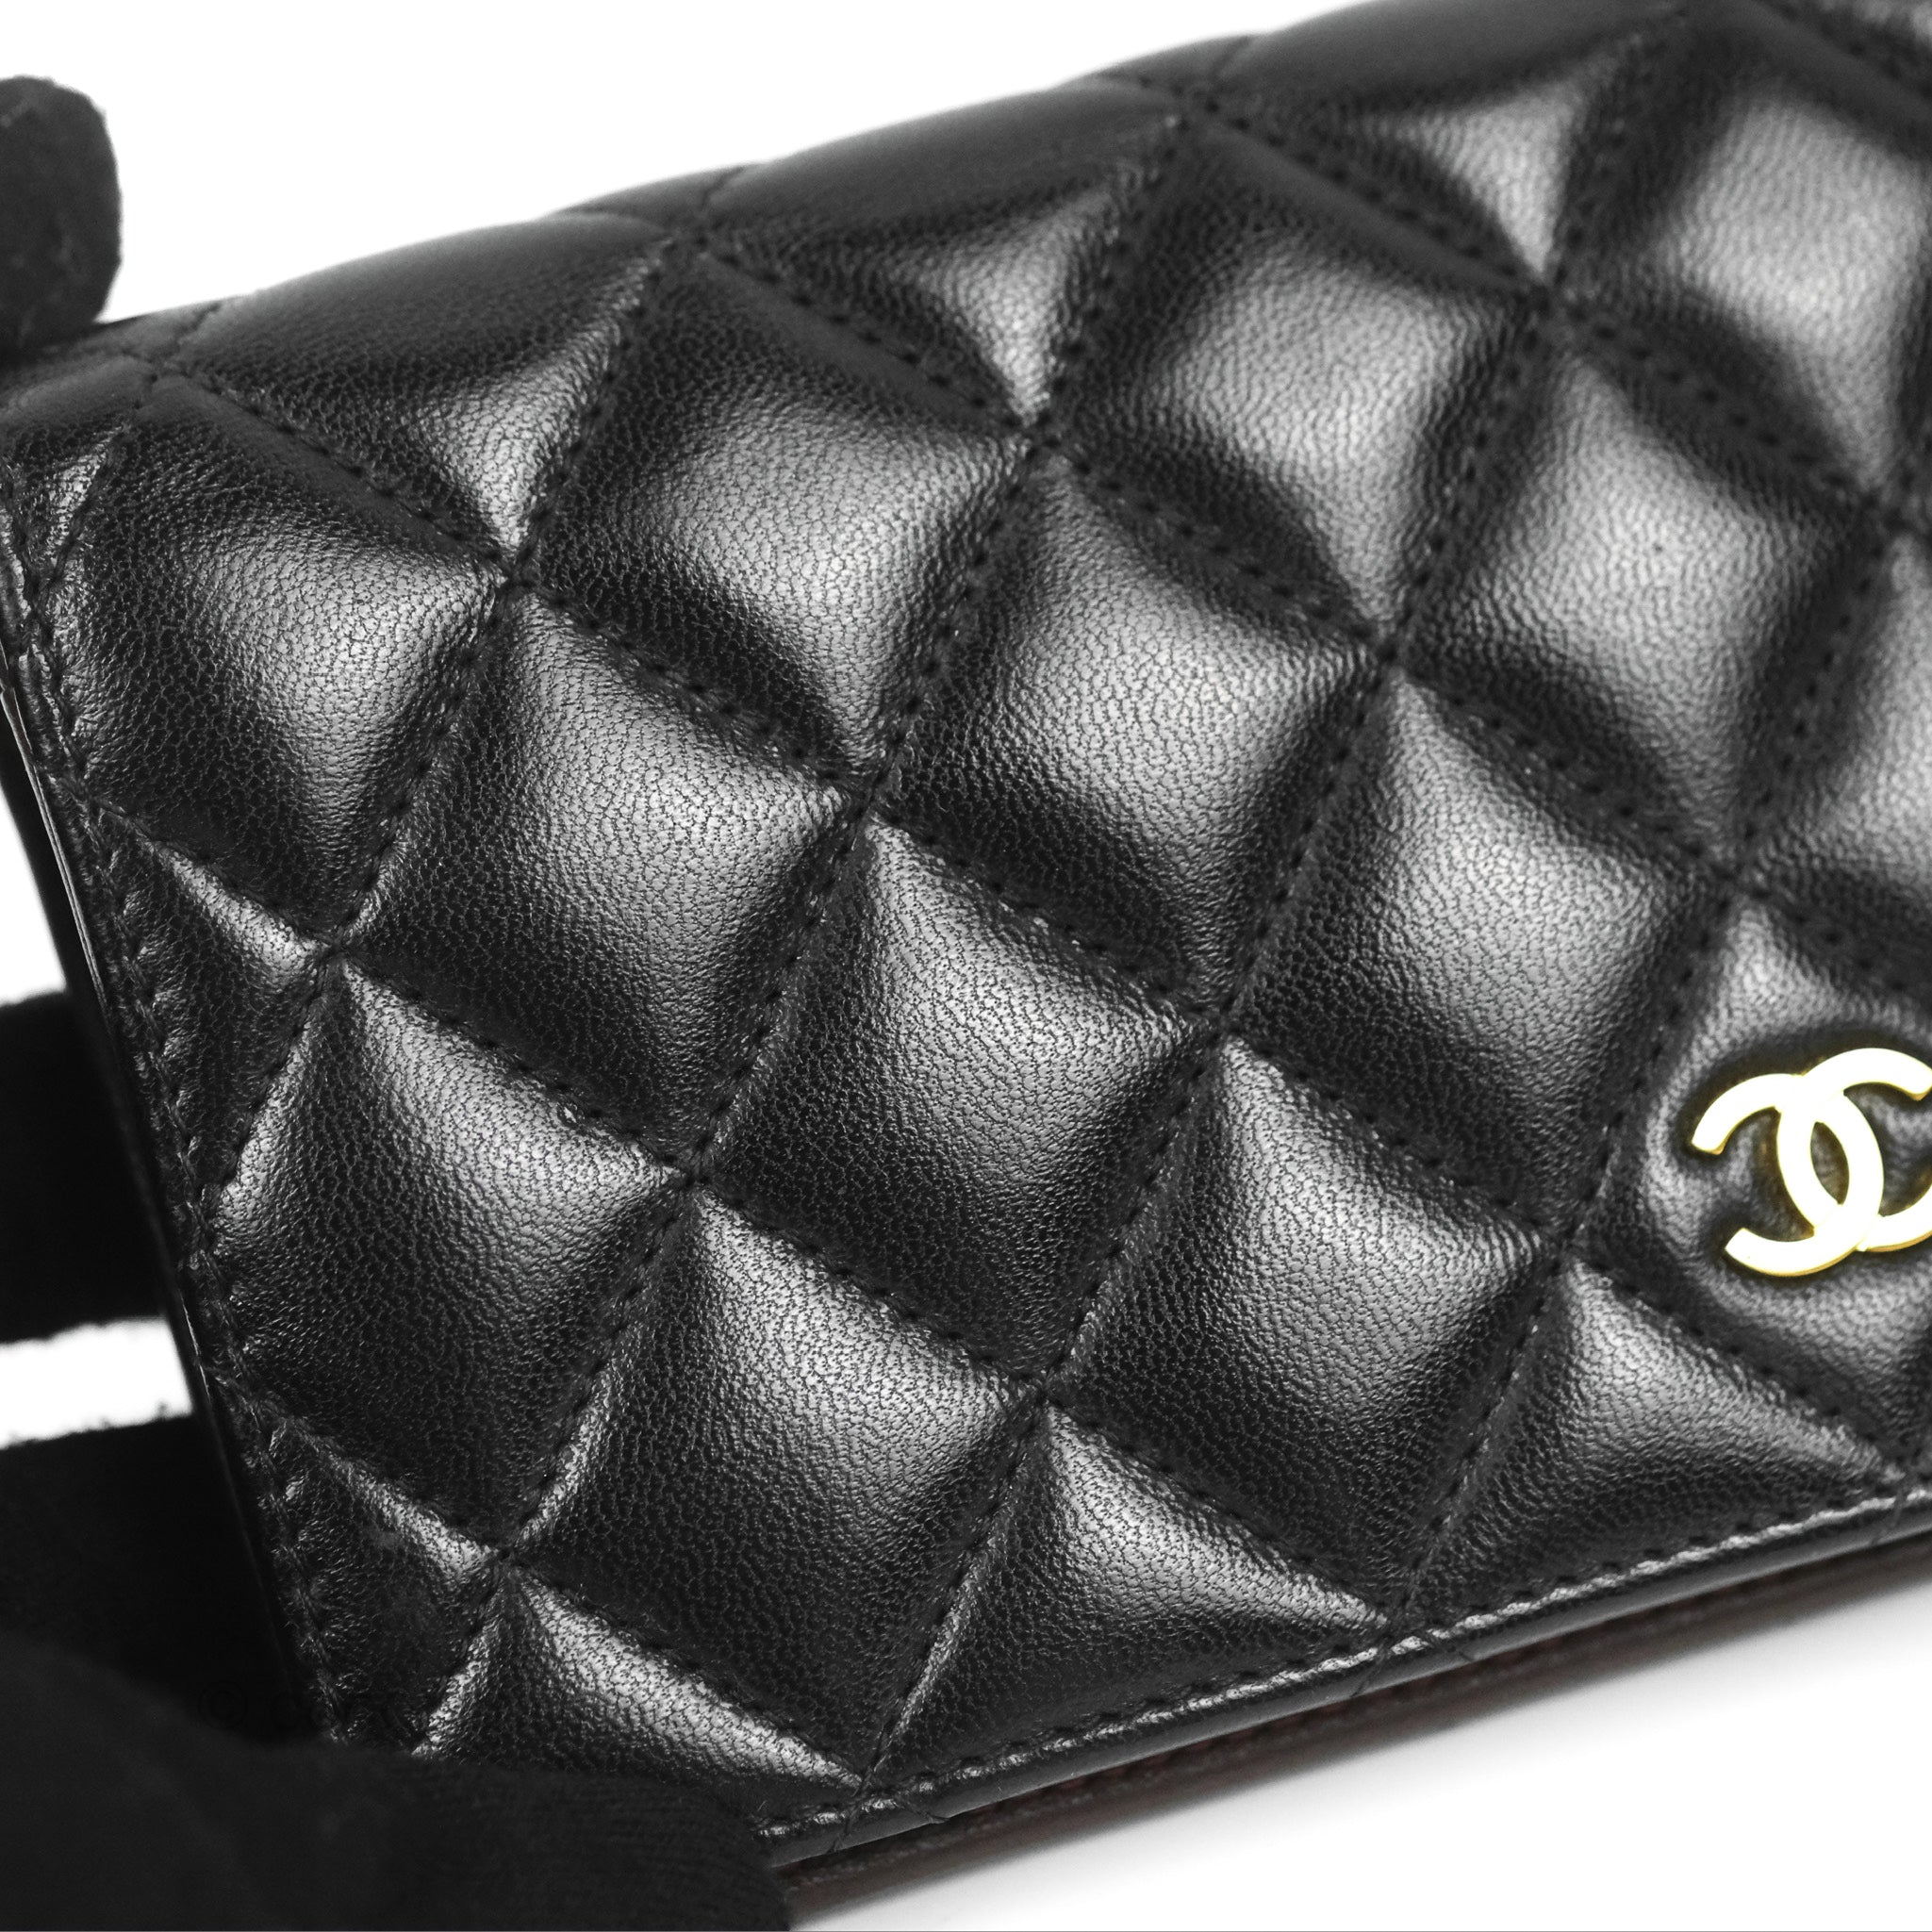 Chanel Classic Flap Wallet Blue Caviar Gold Hardware – Coco Approved Studio